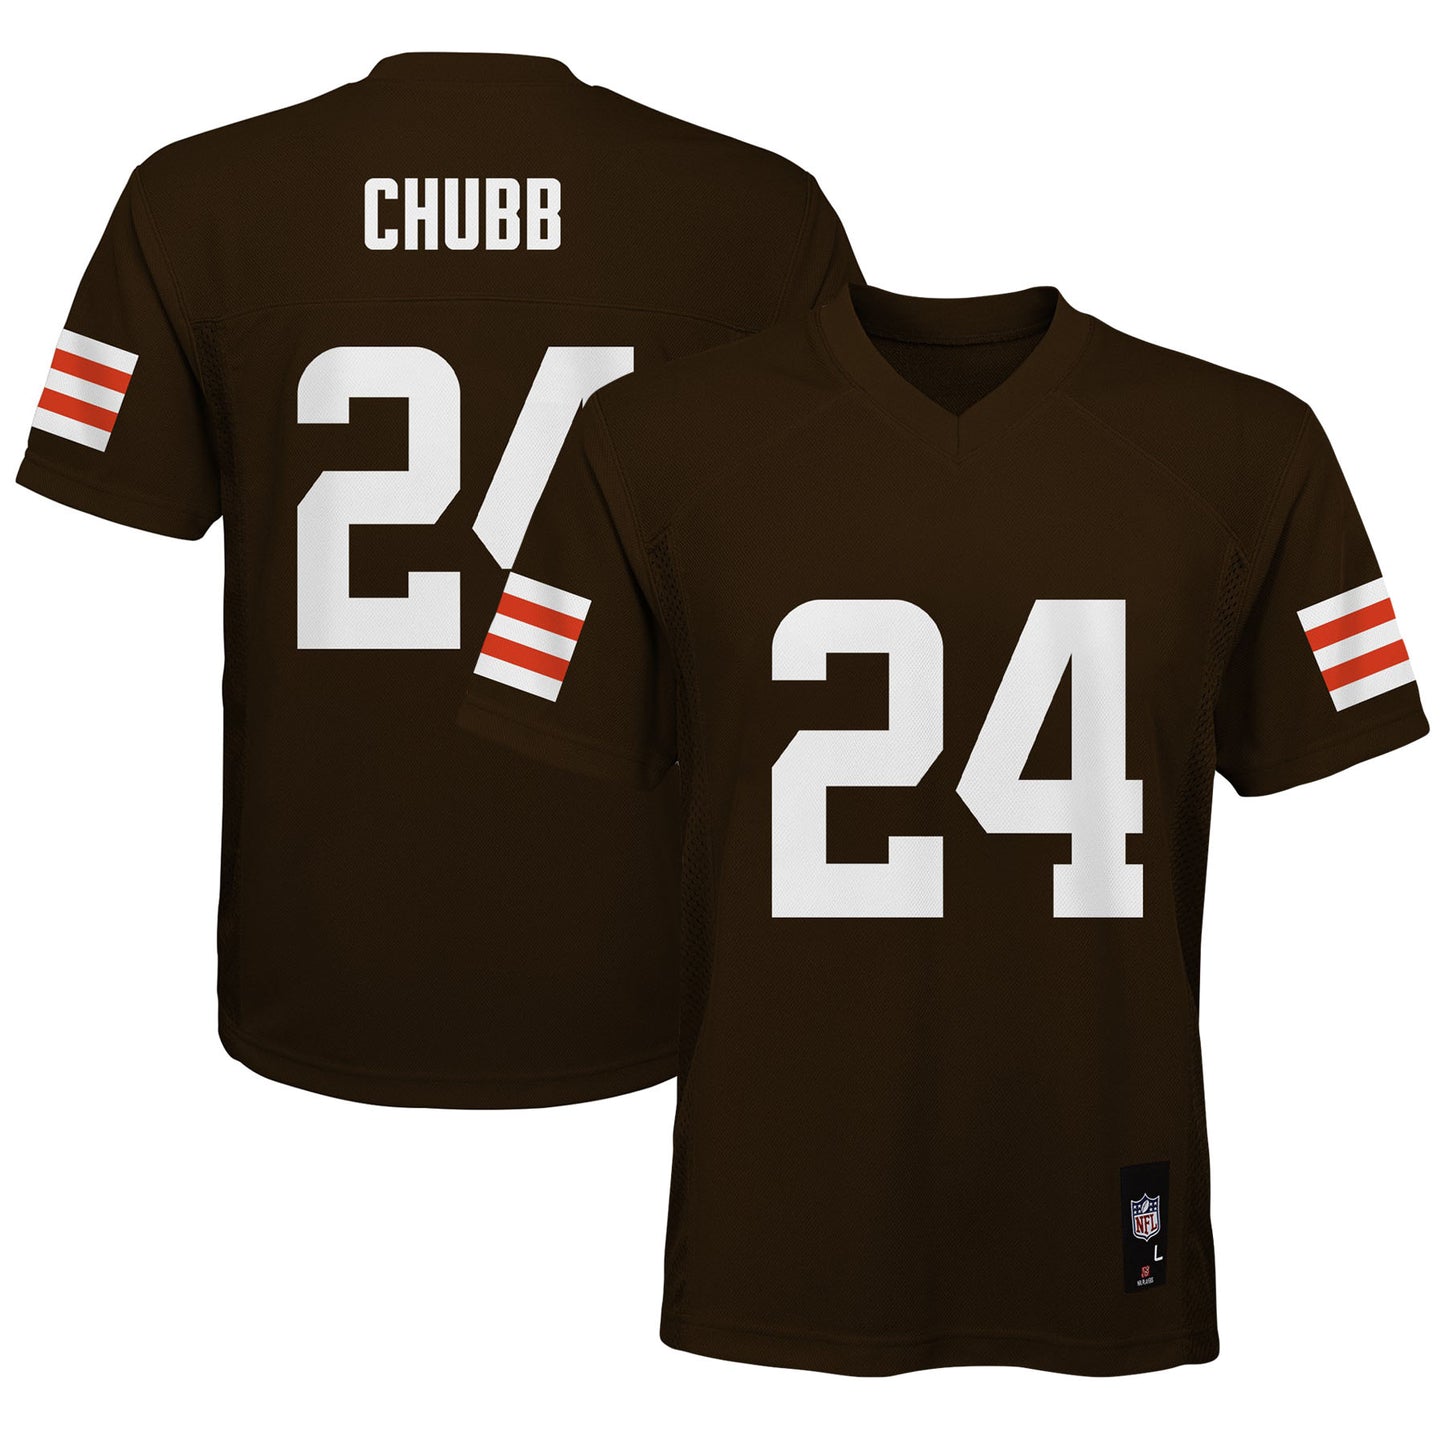 Nick Chubb Cleveland Browns Youth Replica Player Jersey - Brown